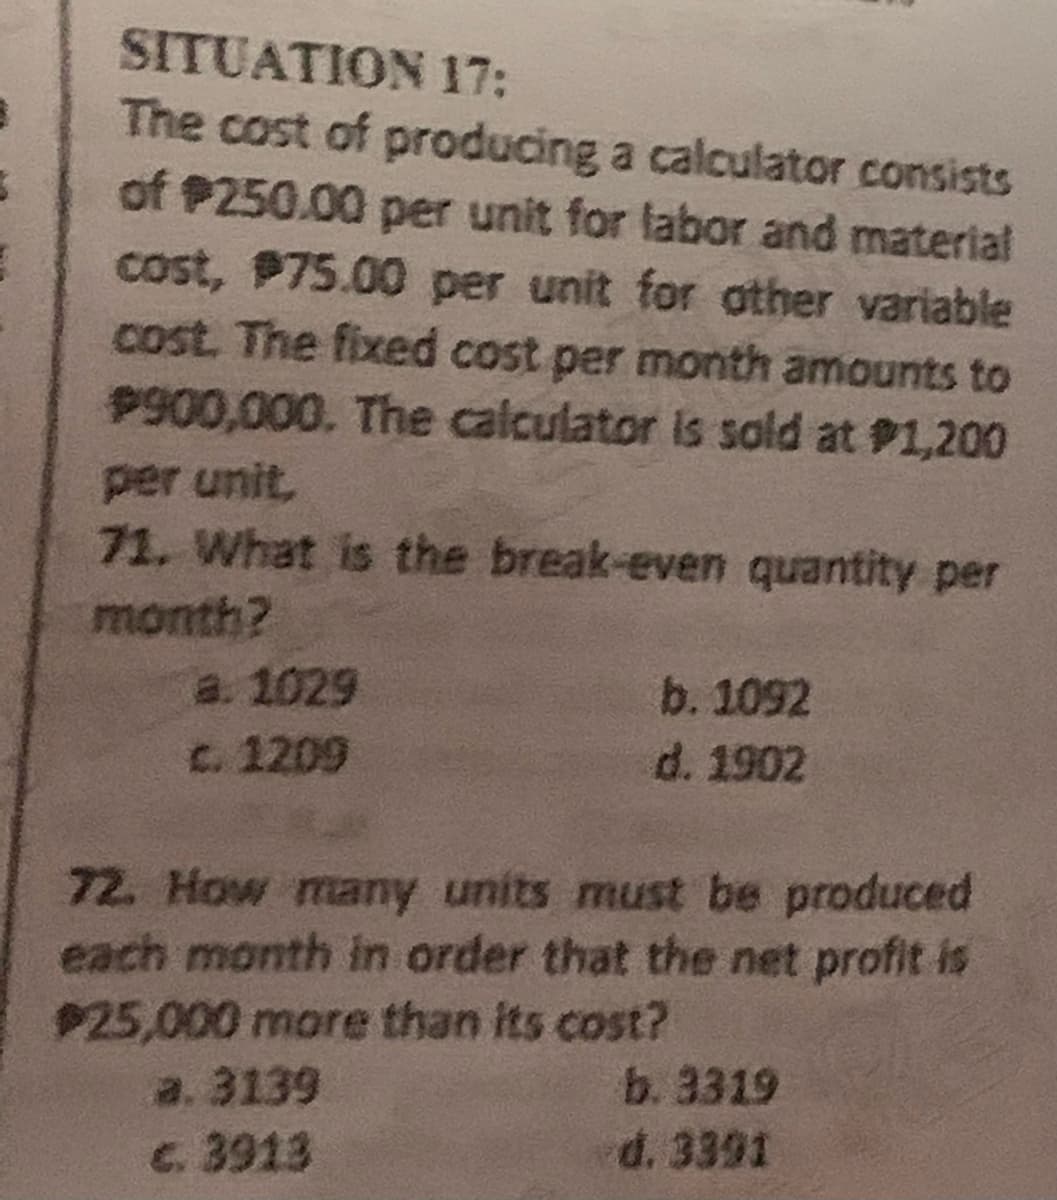 3
SITUATION 17:
The cost of producing a calculator consists
of $250.00 per unit for labor and material
cost, $75.00 per unit for other variable
cost. The fixed cost per month amounts to
$900,000. The calculator is sold at #1,200
per unit,
71. What is the break-even quantity per
month?
a. 1029
c. 1209
b. 1092
d. 1902
72. How many units must be produced
each month in order that the net profit is
$25,000 more than its cost?
a. 3139
c. 3913
b. 3319
d. 3391